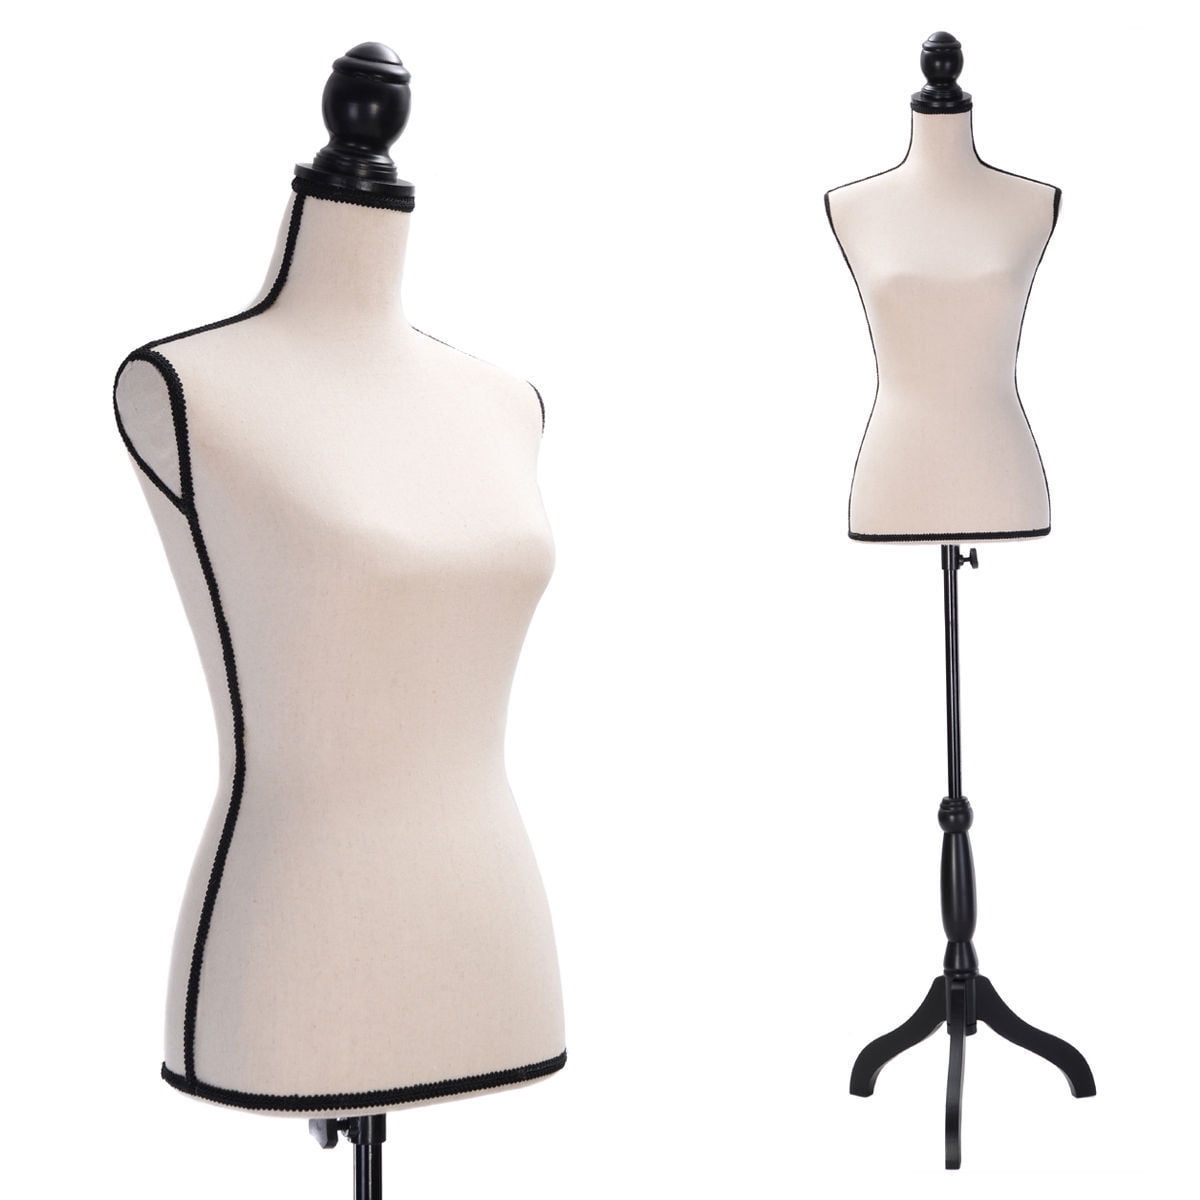 158fc Made by OM Male Torso Mannequin Form with Base 19 to 38 Height for Sizes S & M Flesh